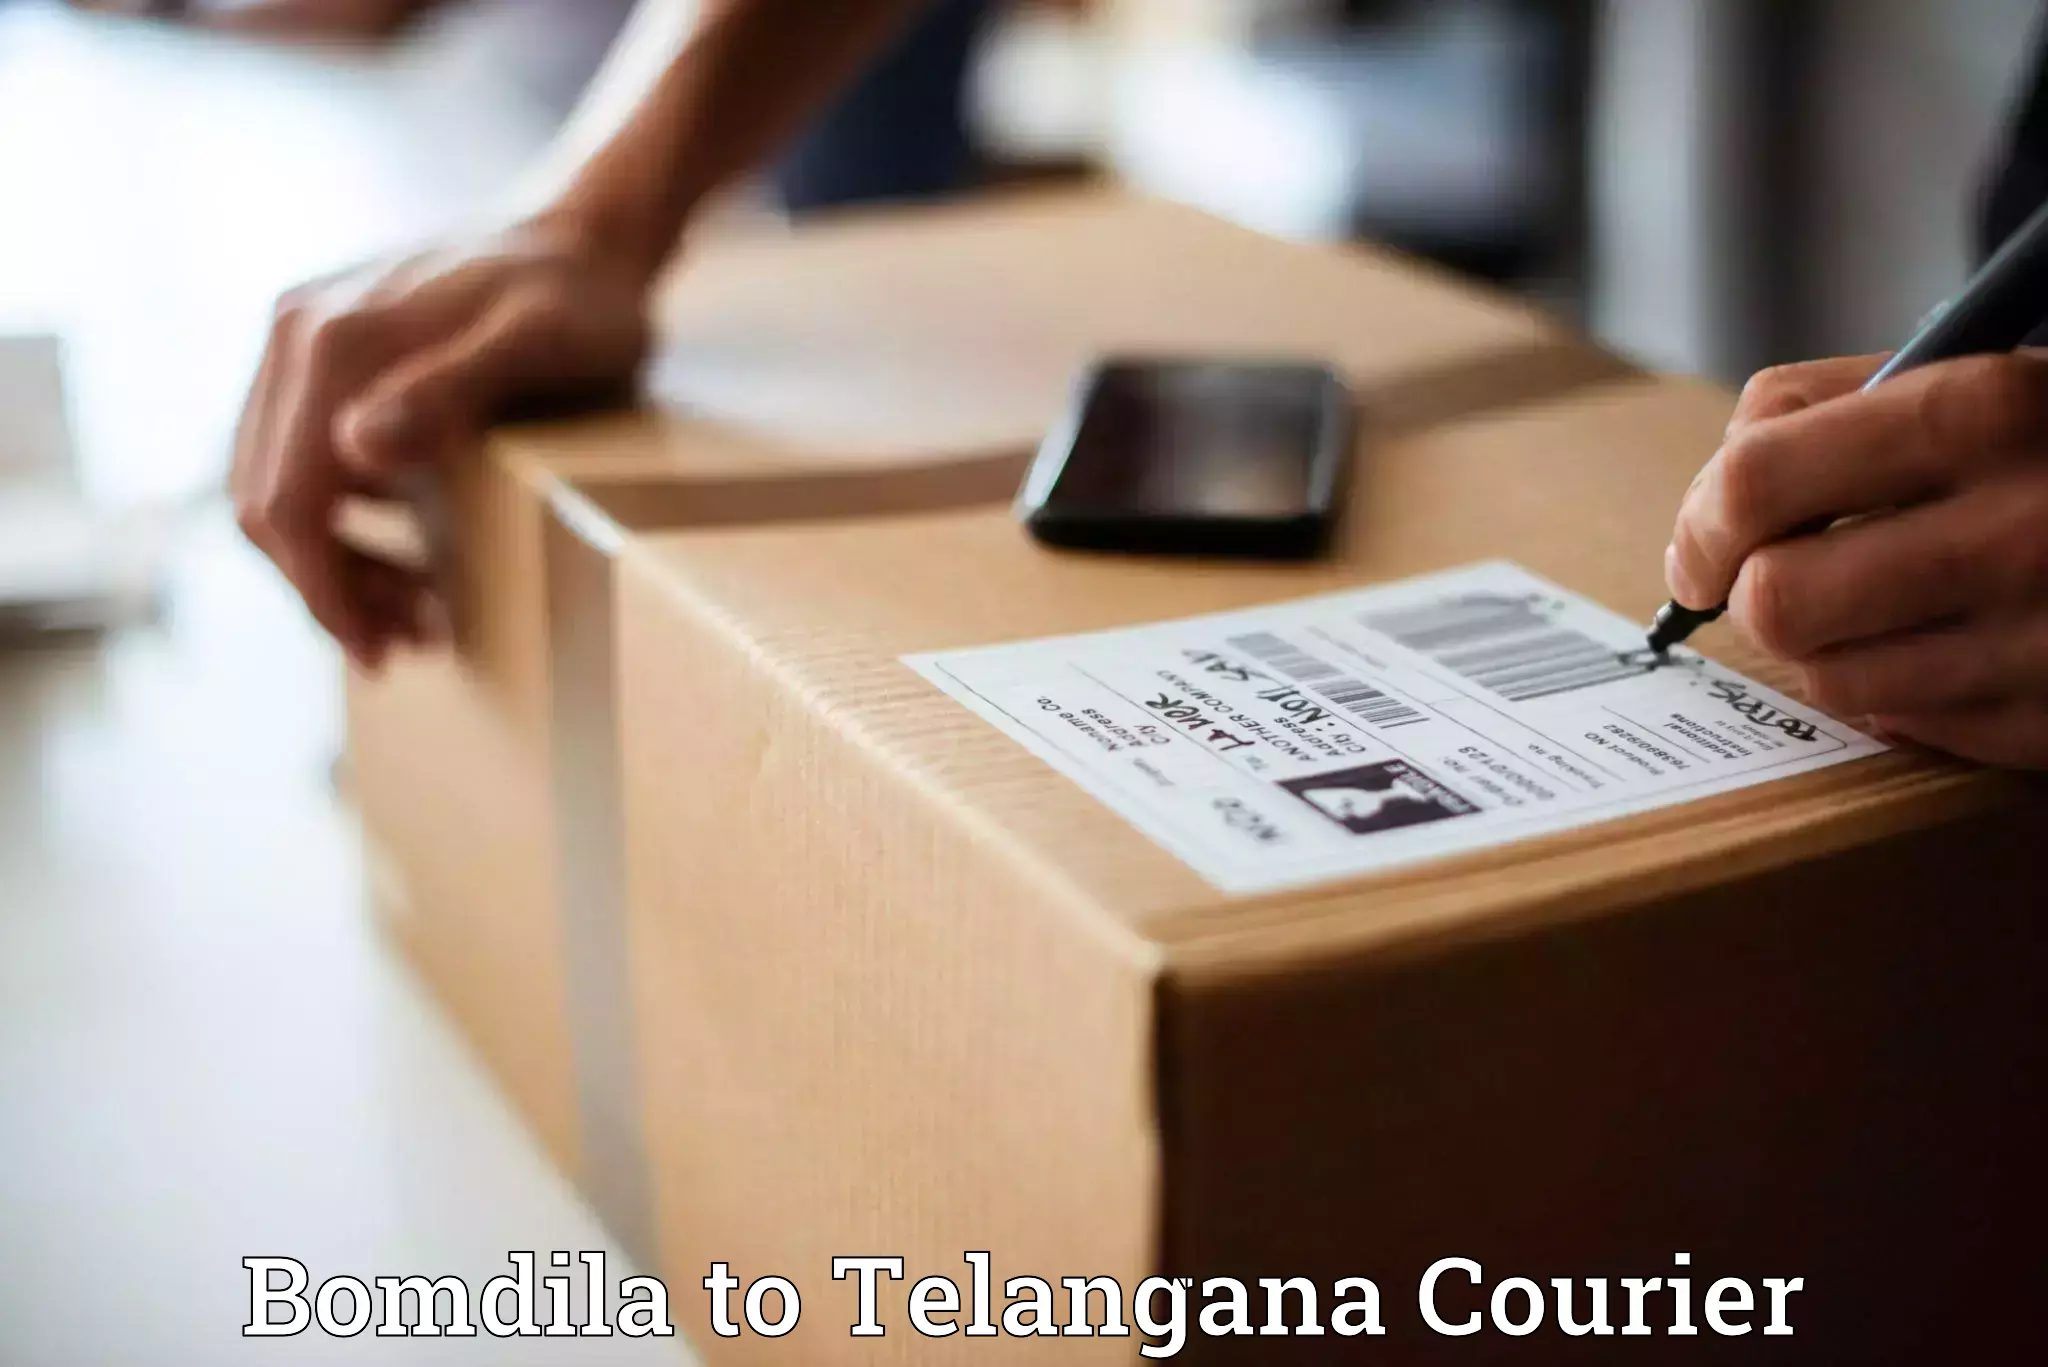 Courier app in Bomdila to Bhainsa